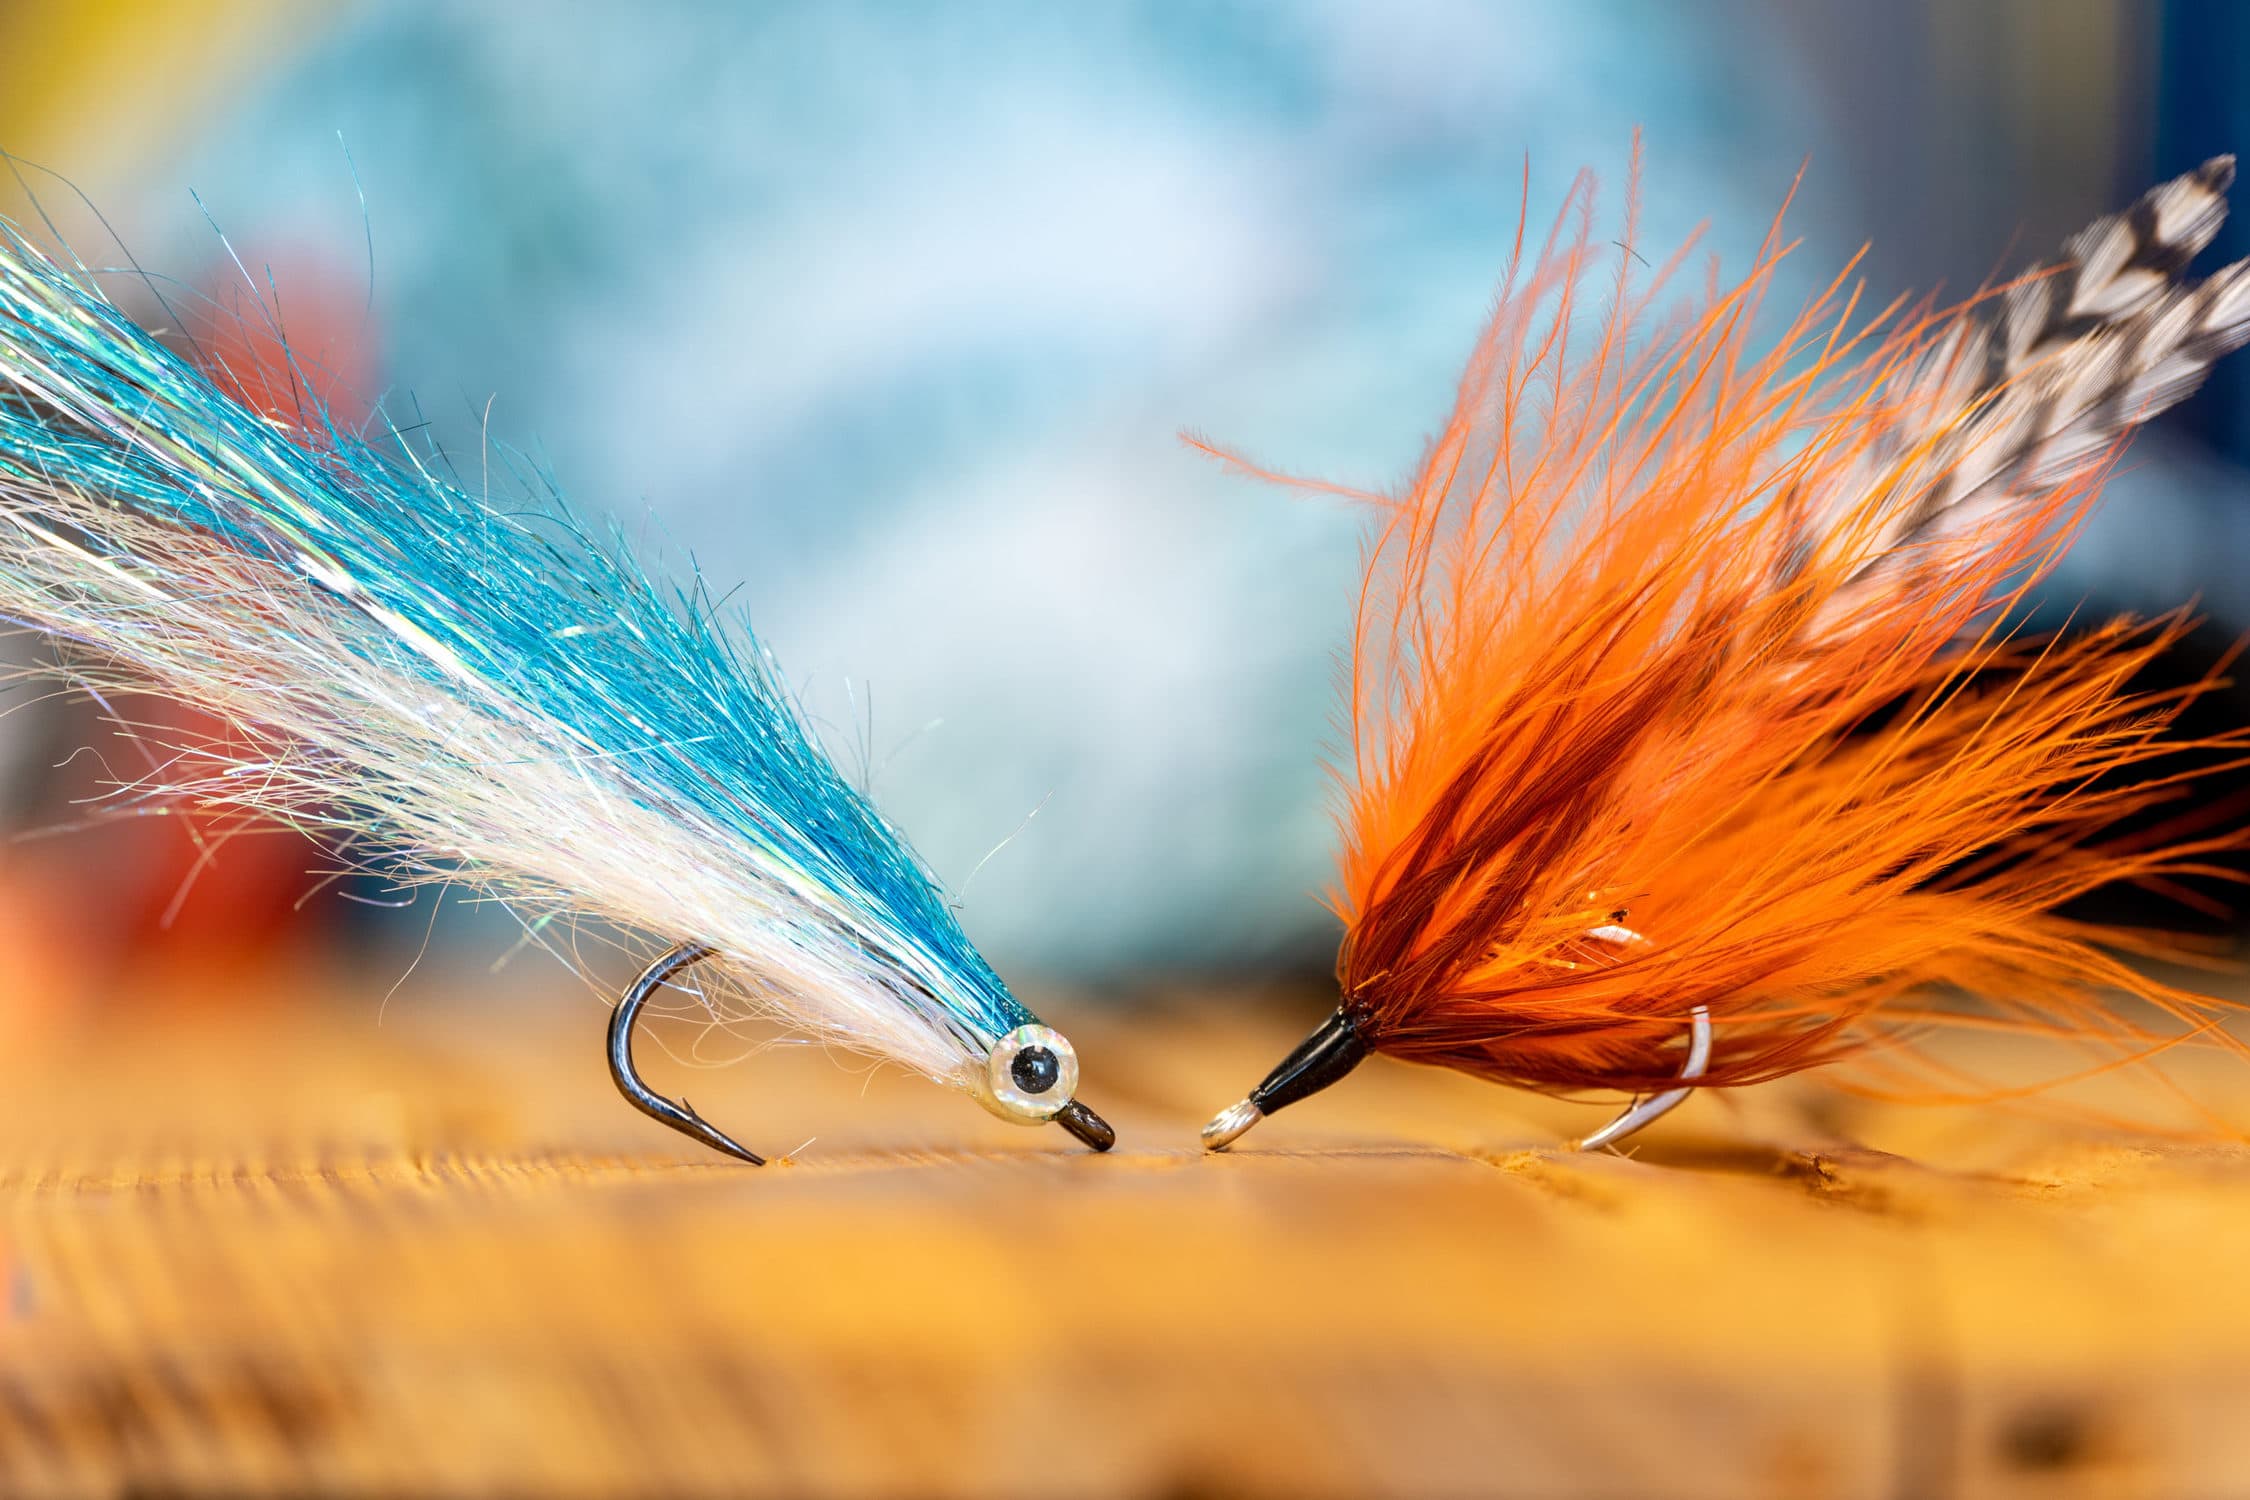 The Beginner's Guide To Fly Tying Material | Ole Florida Fly Shop